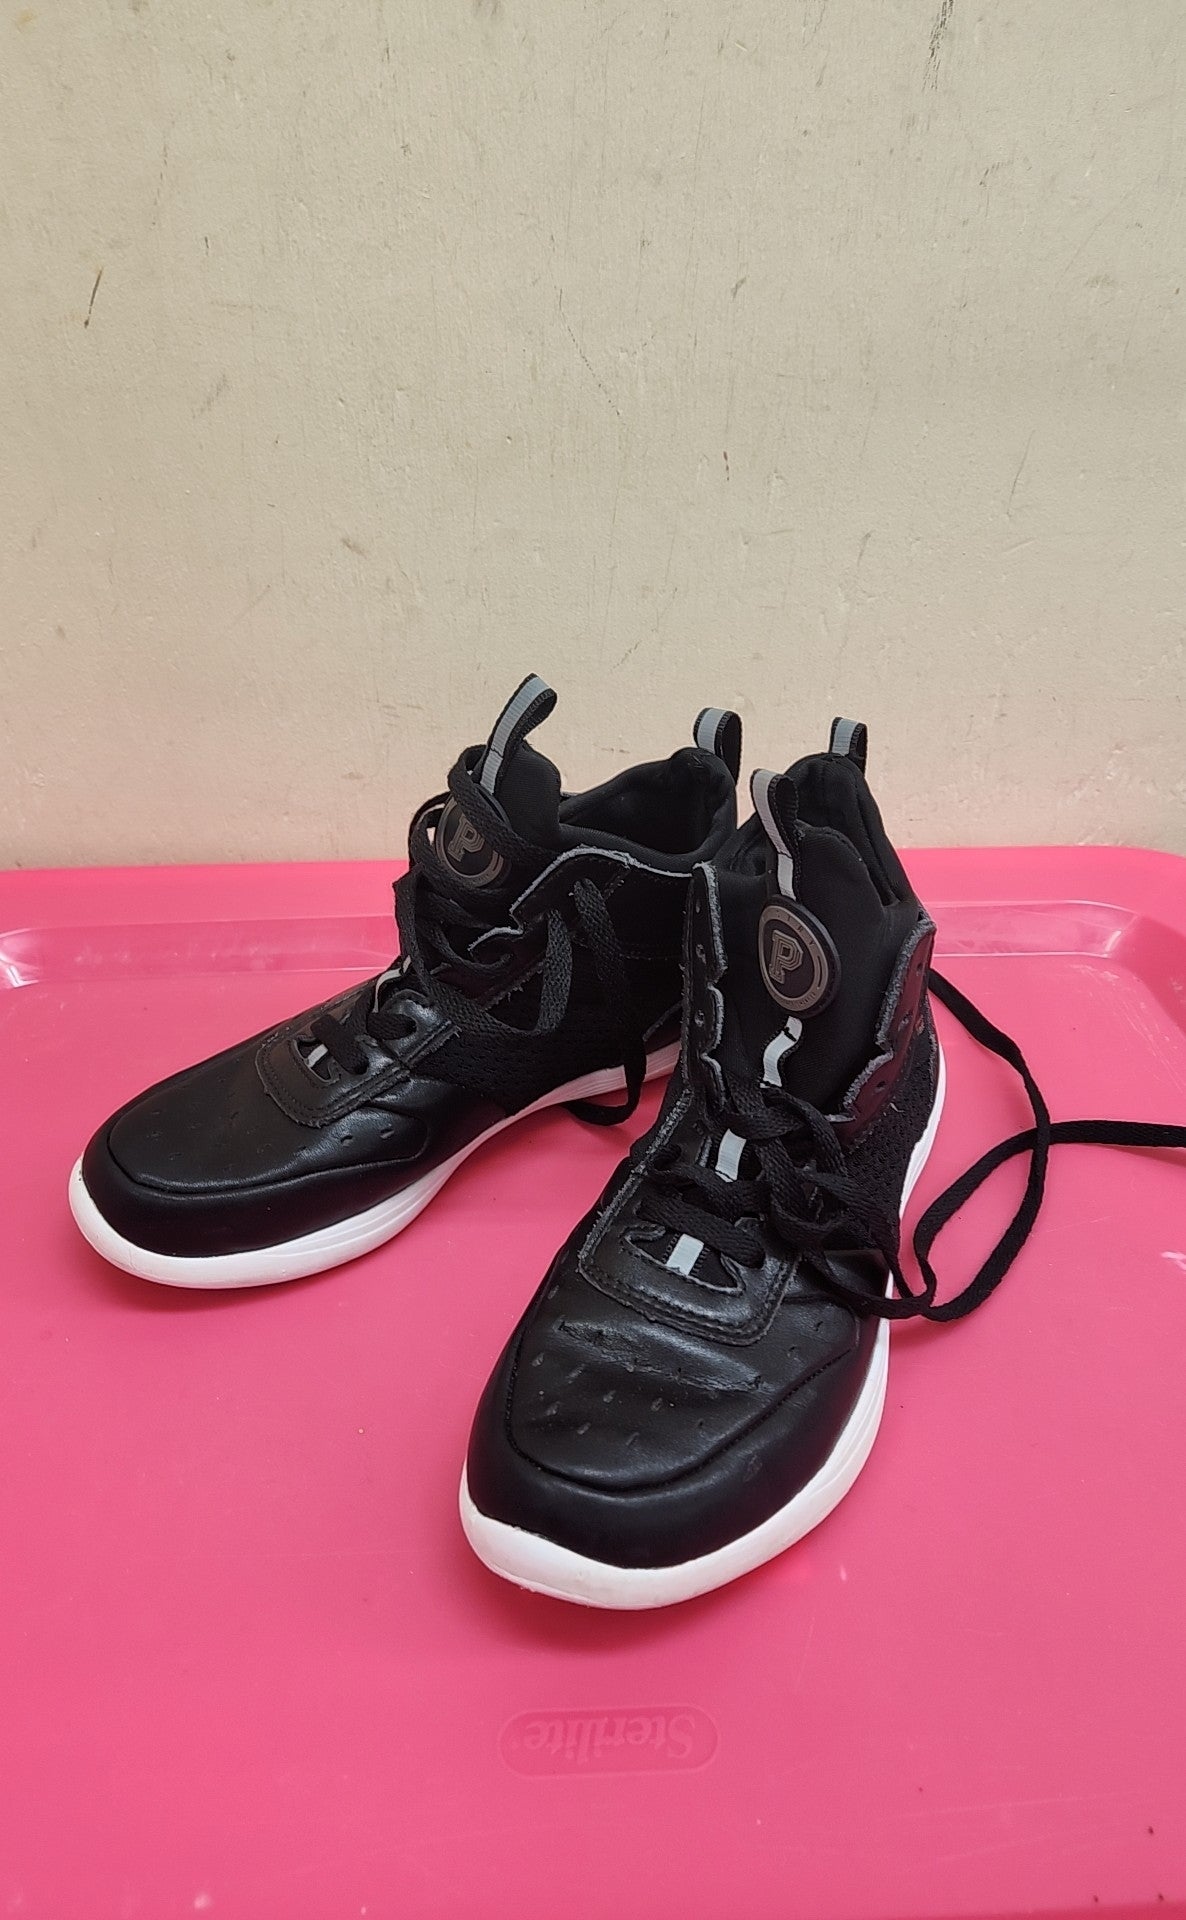 Pastry Girl's Size 7 Black Sneakers